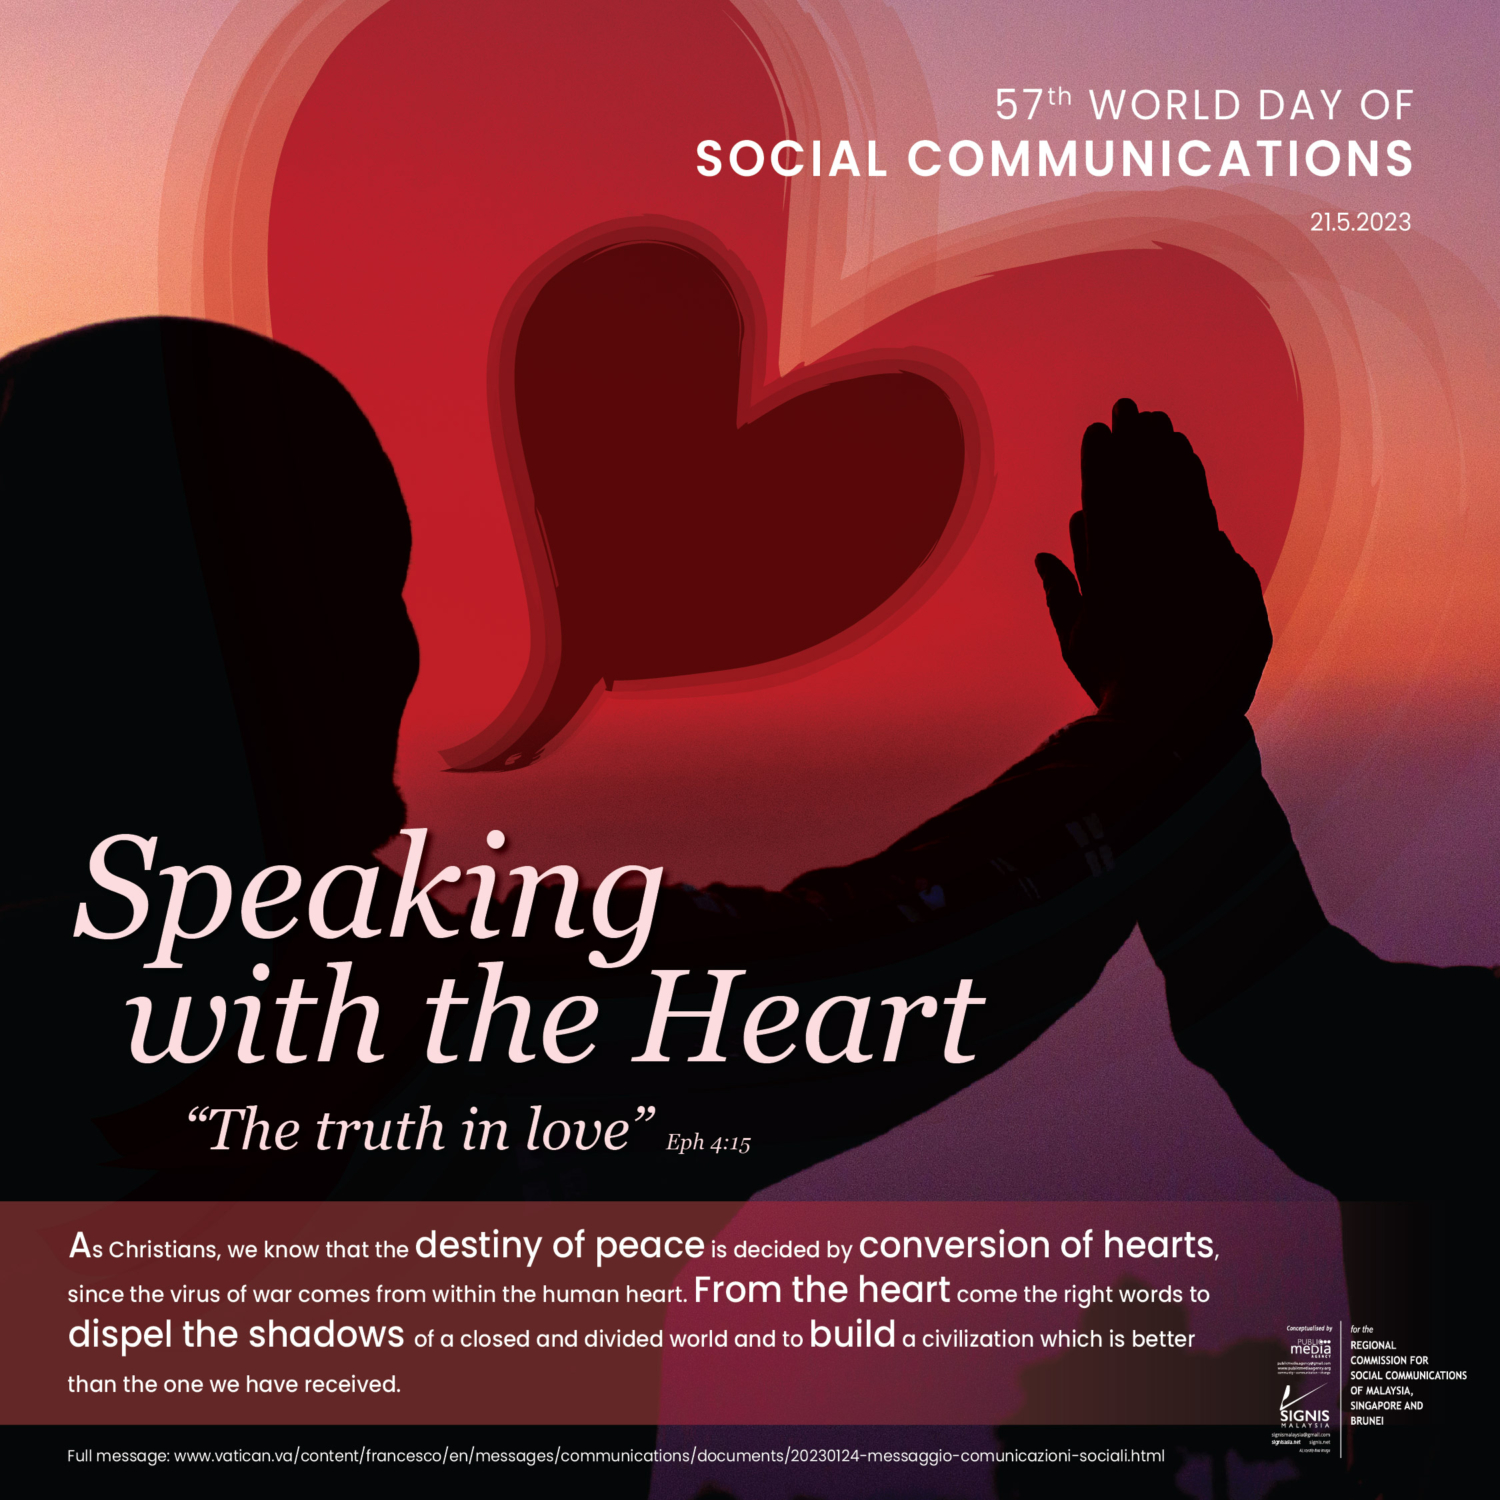 The Catholic Church observes the 57th World Day of Social Communications on May 21, 2023.